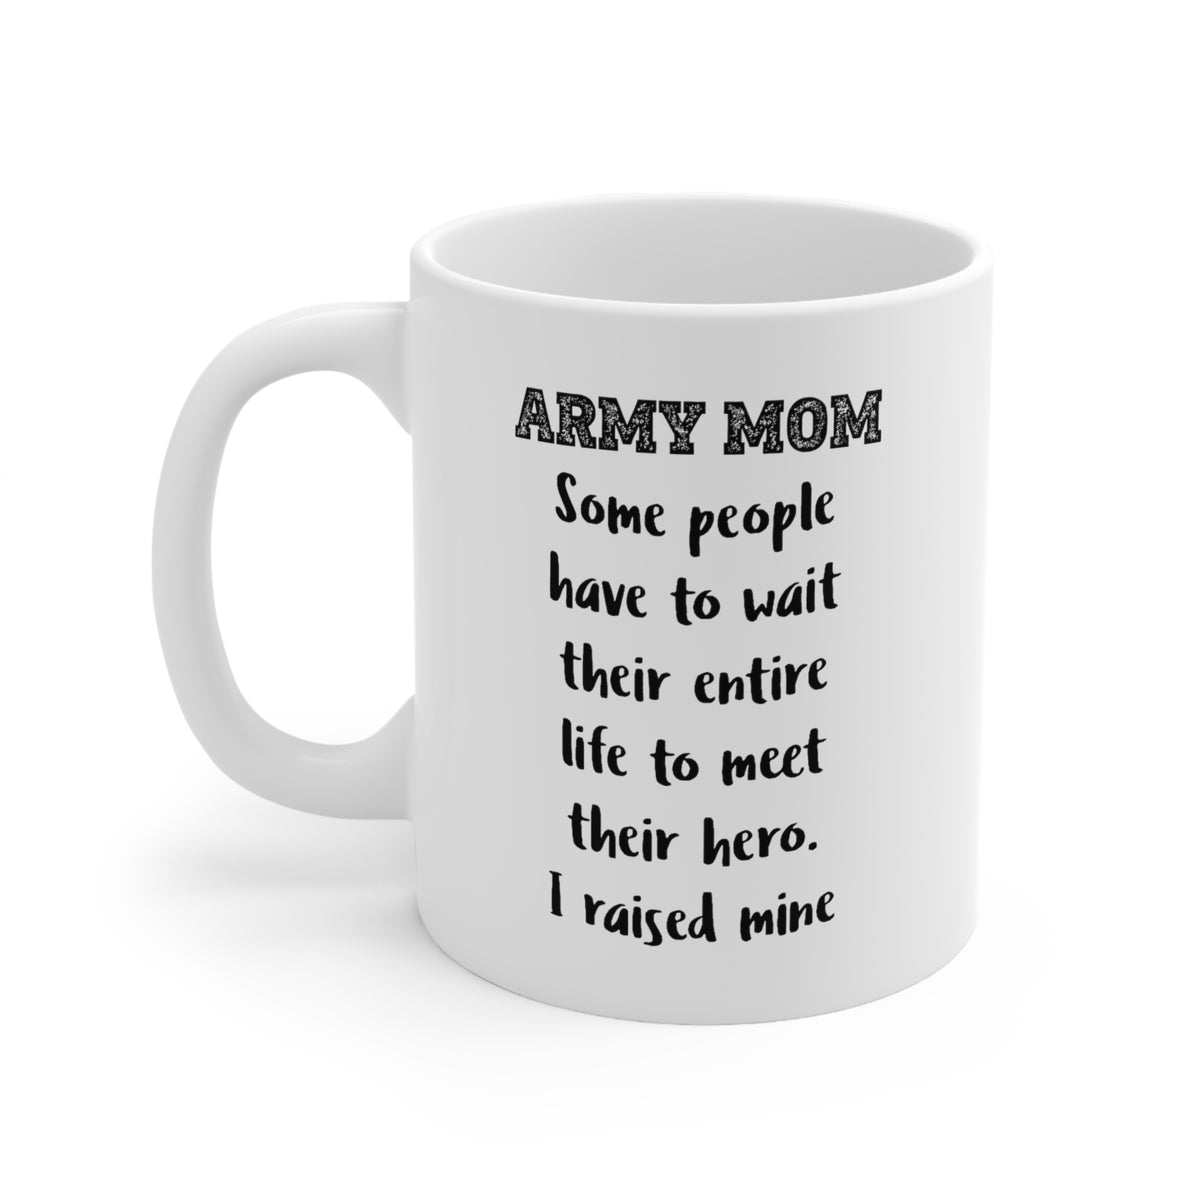 Army Mom. Some People Have To Wait Their Entire Life To Meet Their Hero. I Raised Mine - Coffee Mug For Army Mom